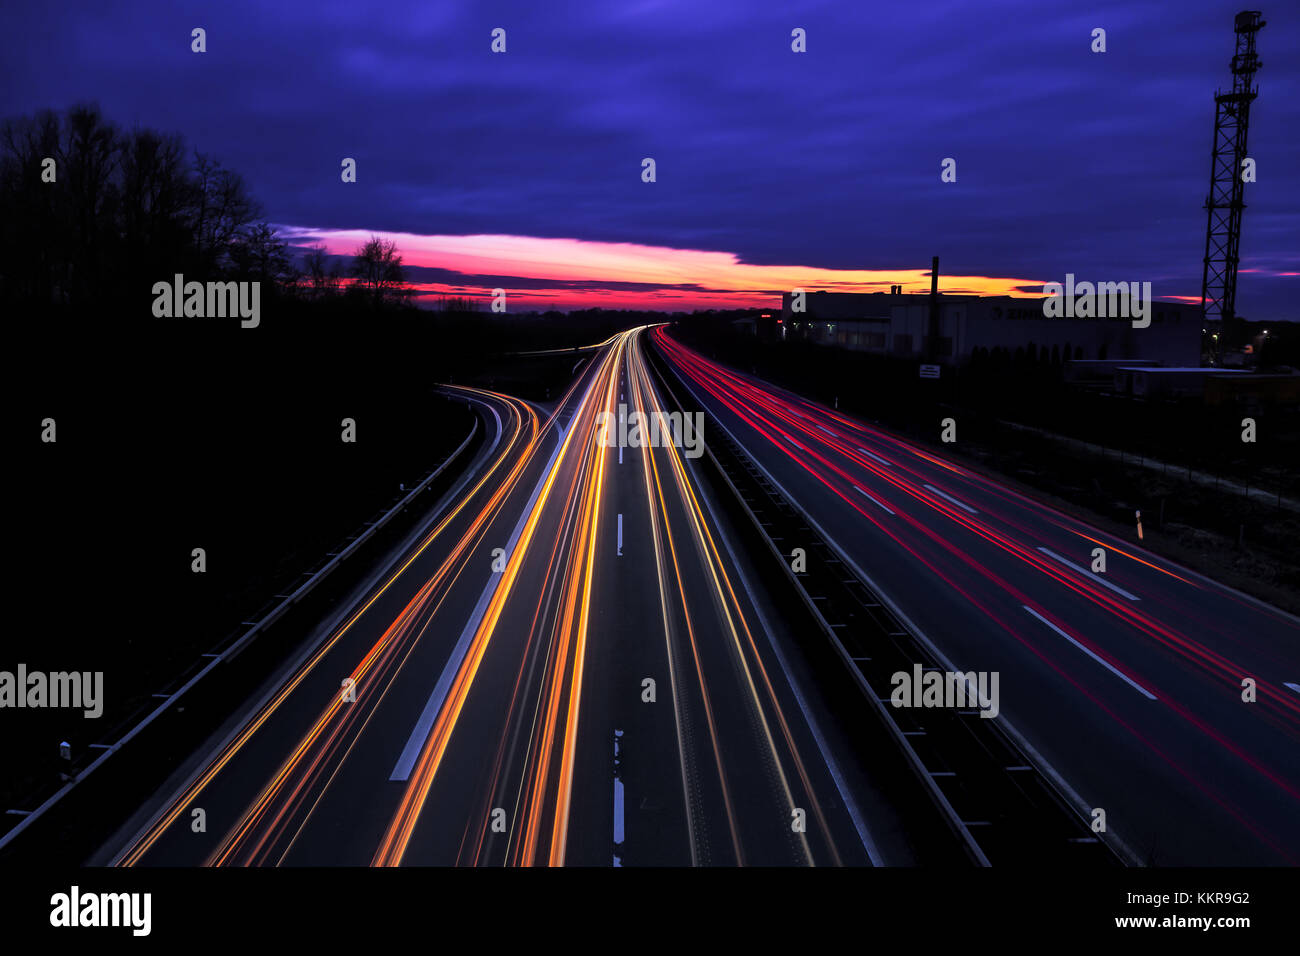 Car lights on a Freeway near Apen at Sunset Stock Photo